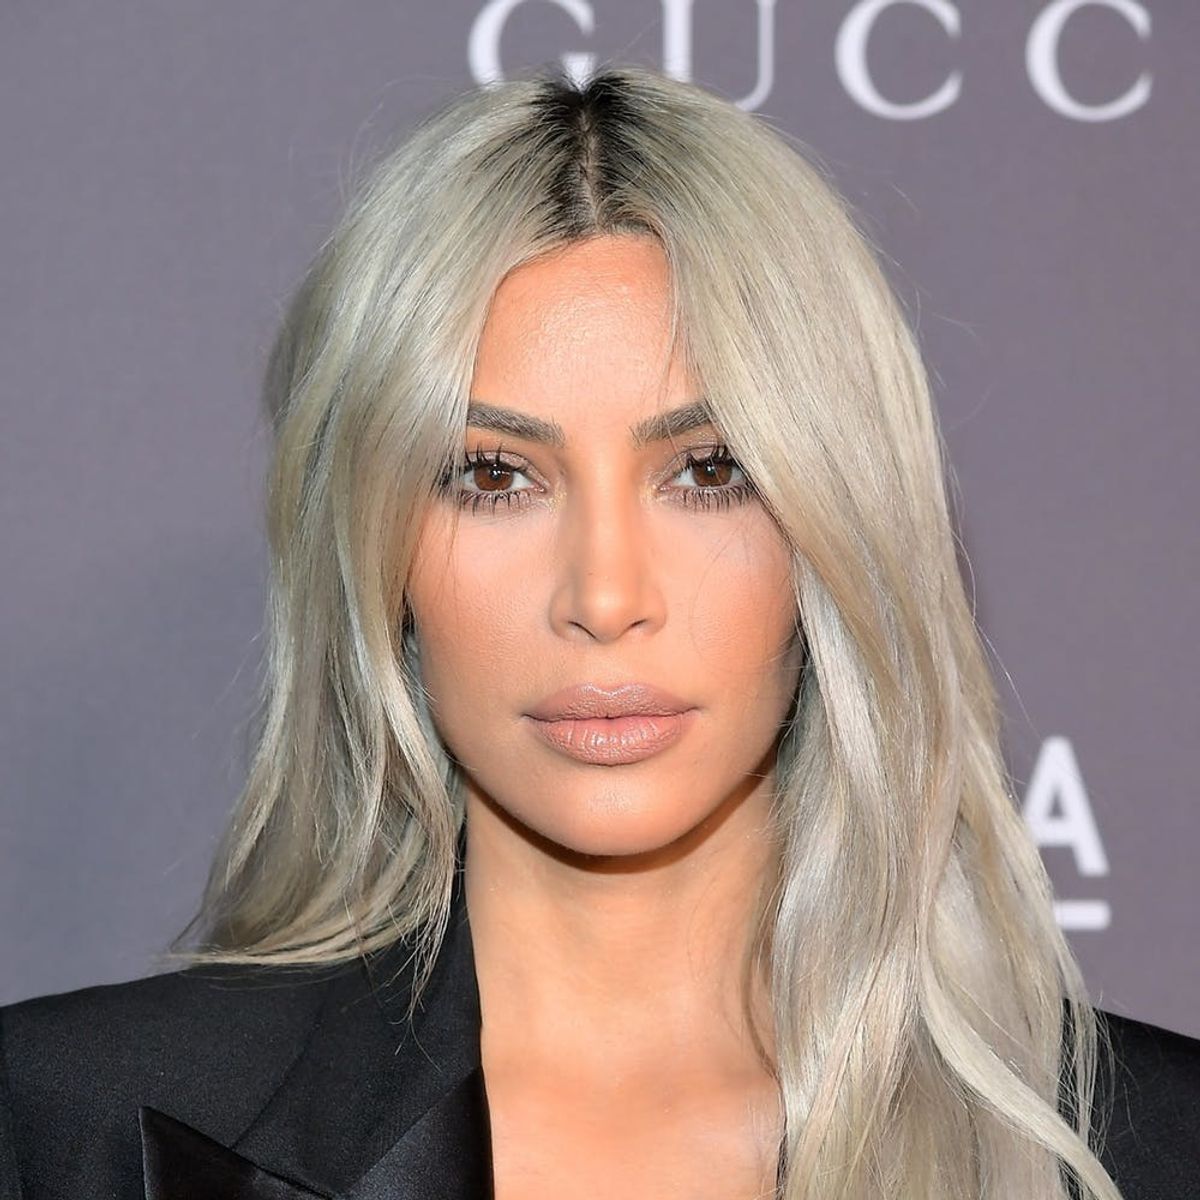 OMG: Kim Kardashian West Just Confirmed News of a Third Baby With an EPIC Baby Shower